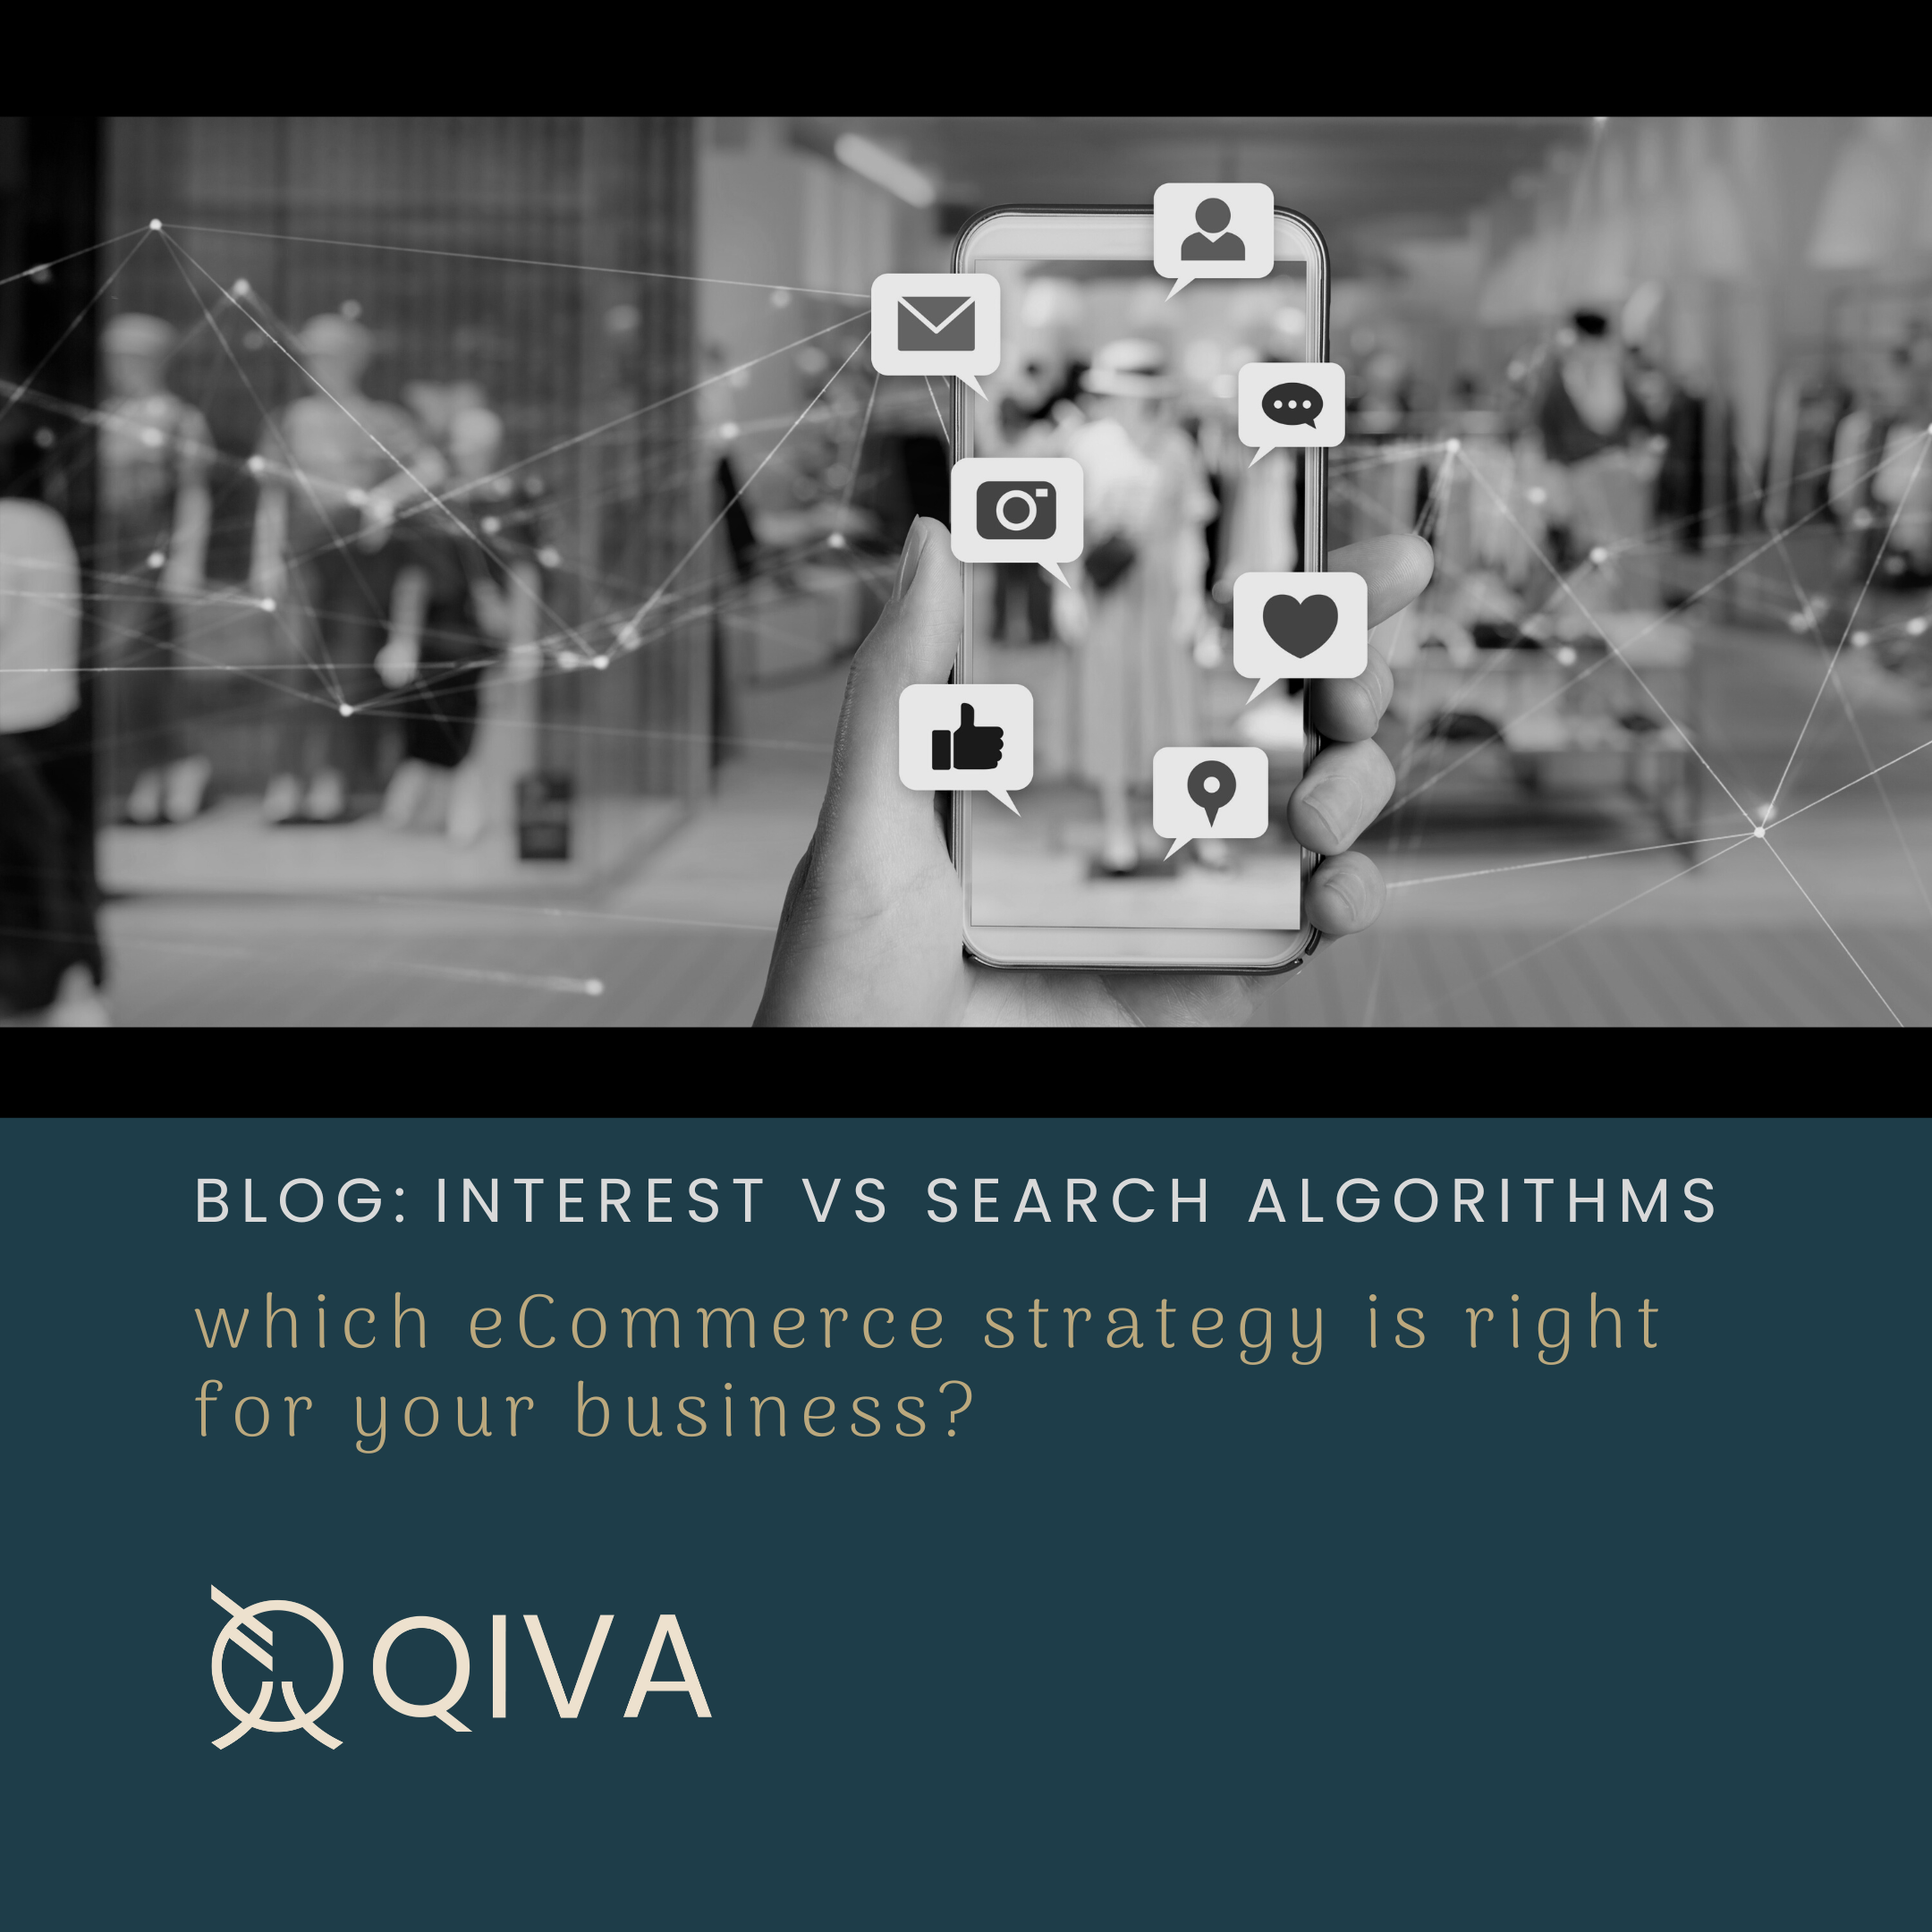 Interest algorithms vs search algorithms - which eCommerce strategy is right for your business?